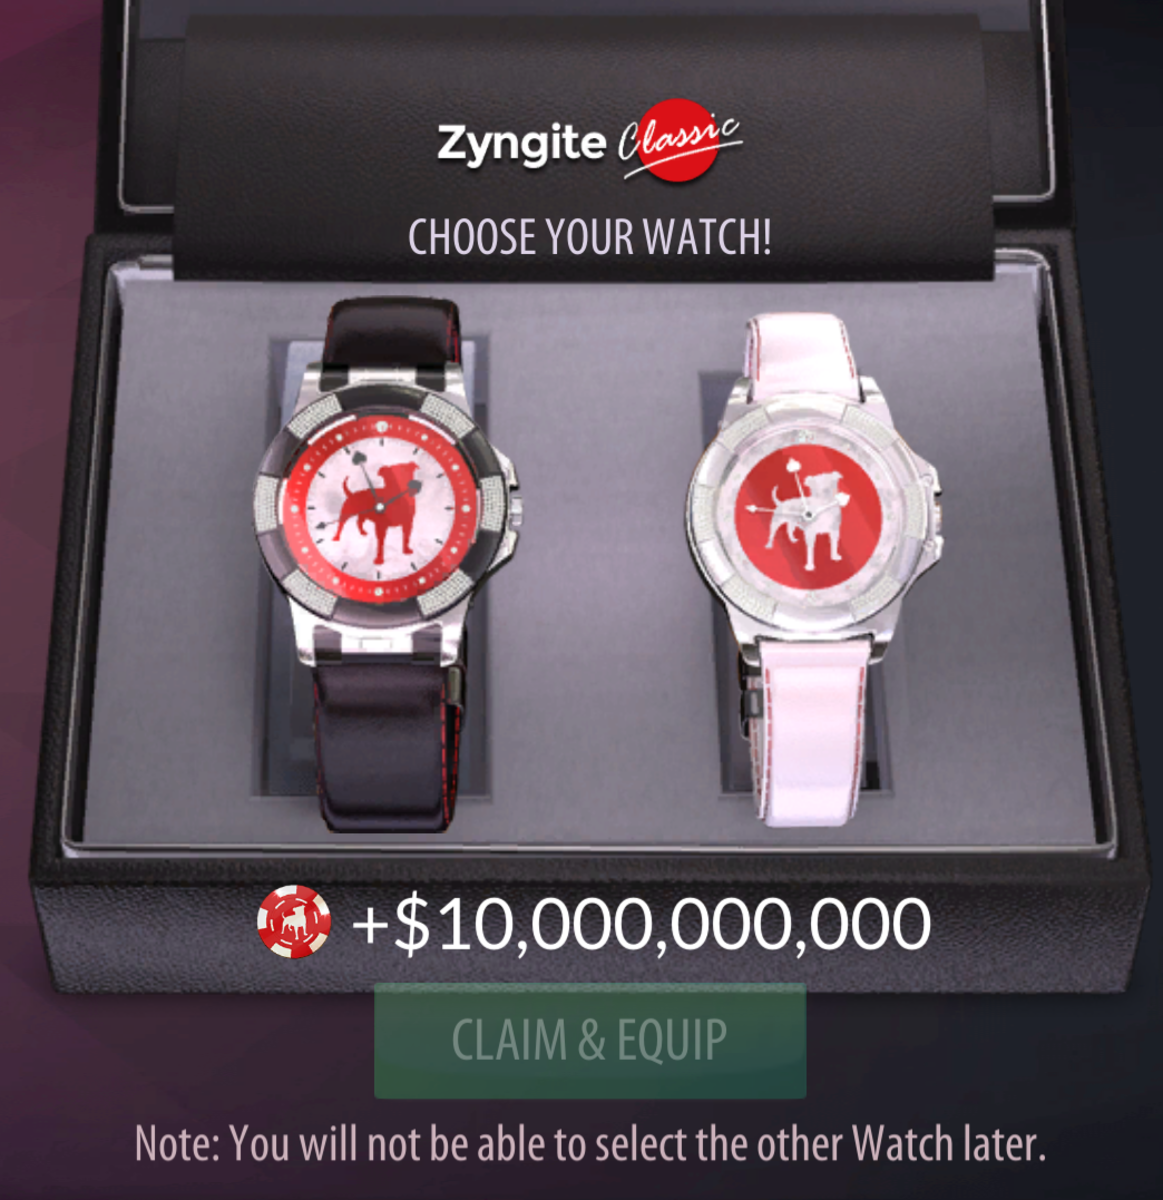 This is the black version of the first poker watch. This is the Zyngite Classic watch.